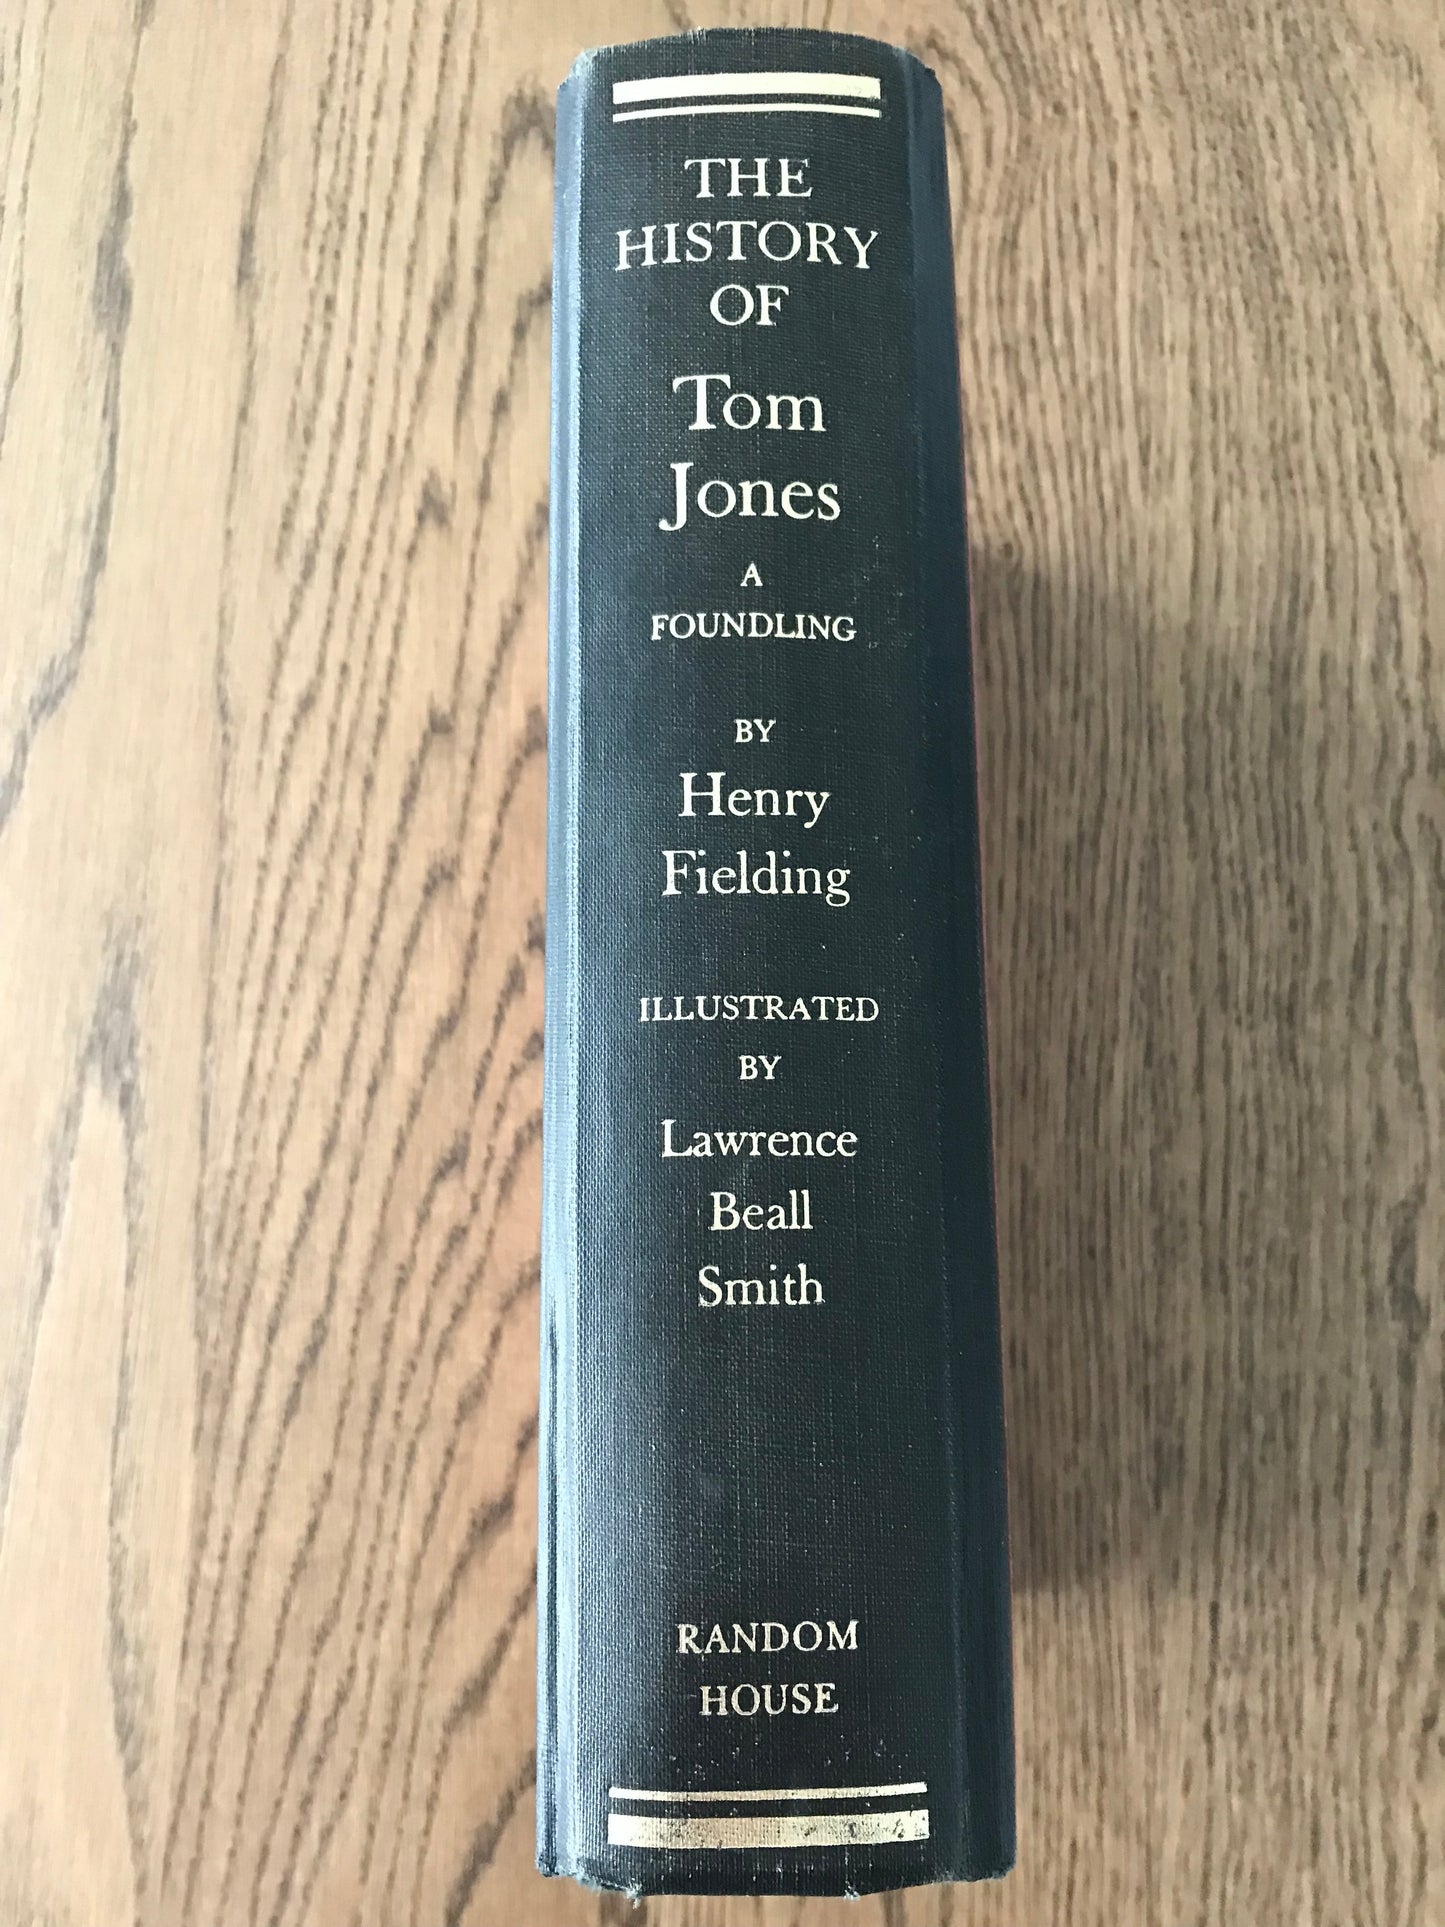 THE HISTORY OF TOM JONES A FOUNDLING - BY HENRY FIELDING BooksCardsNBikes